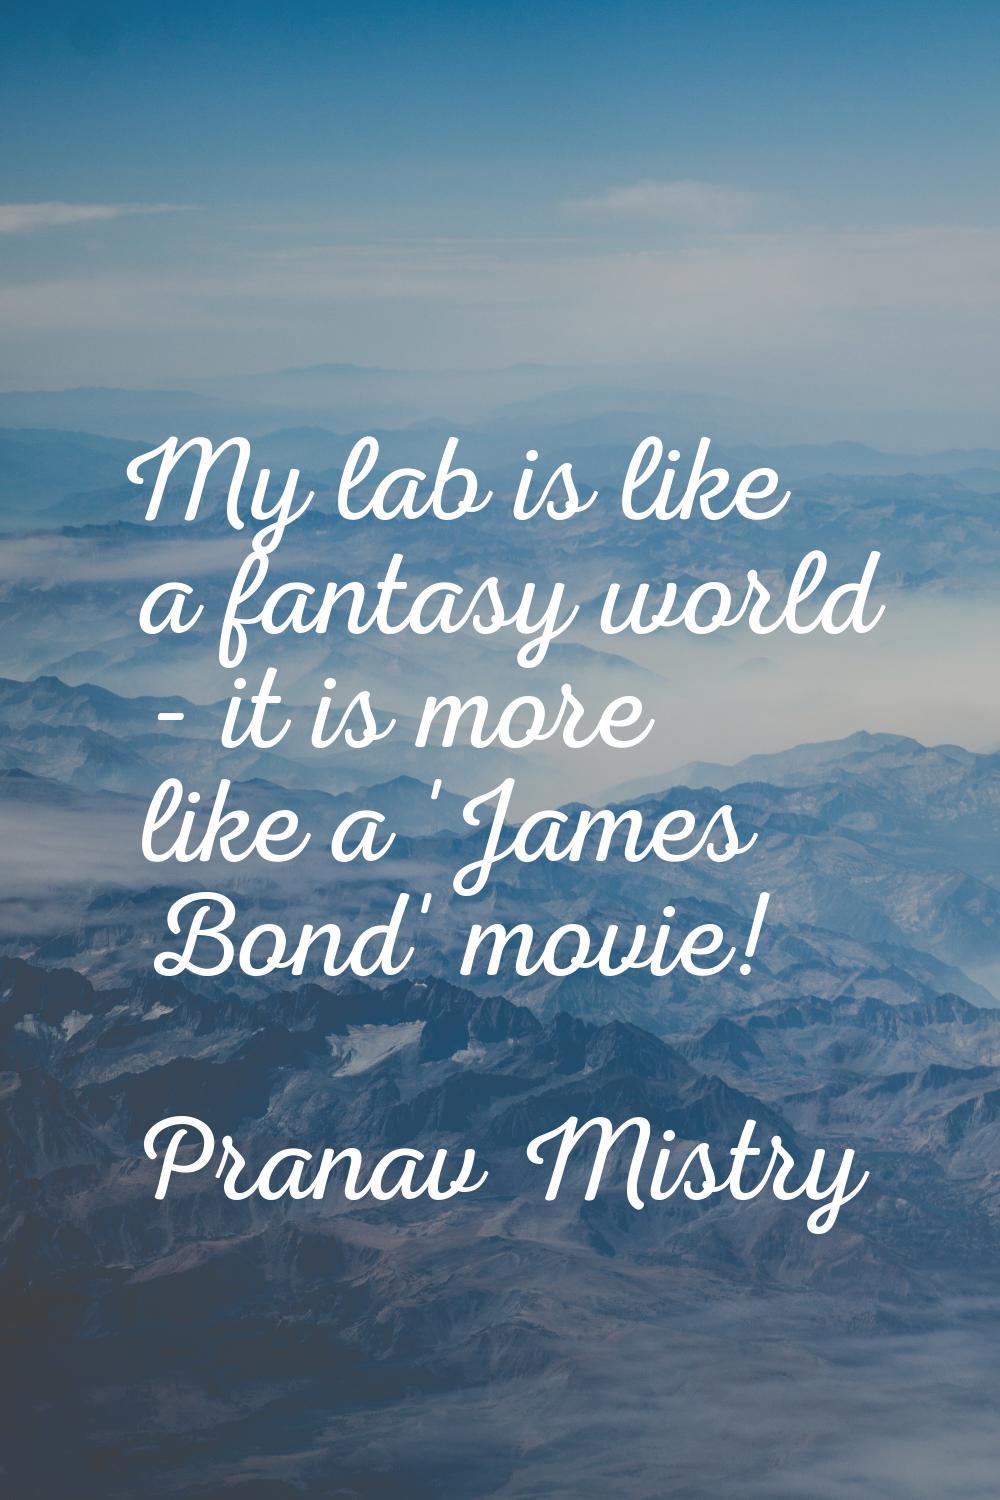 My lab is like a fantasy world - it is more like a 'James Bond' movie!